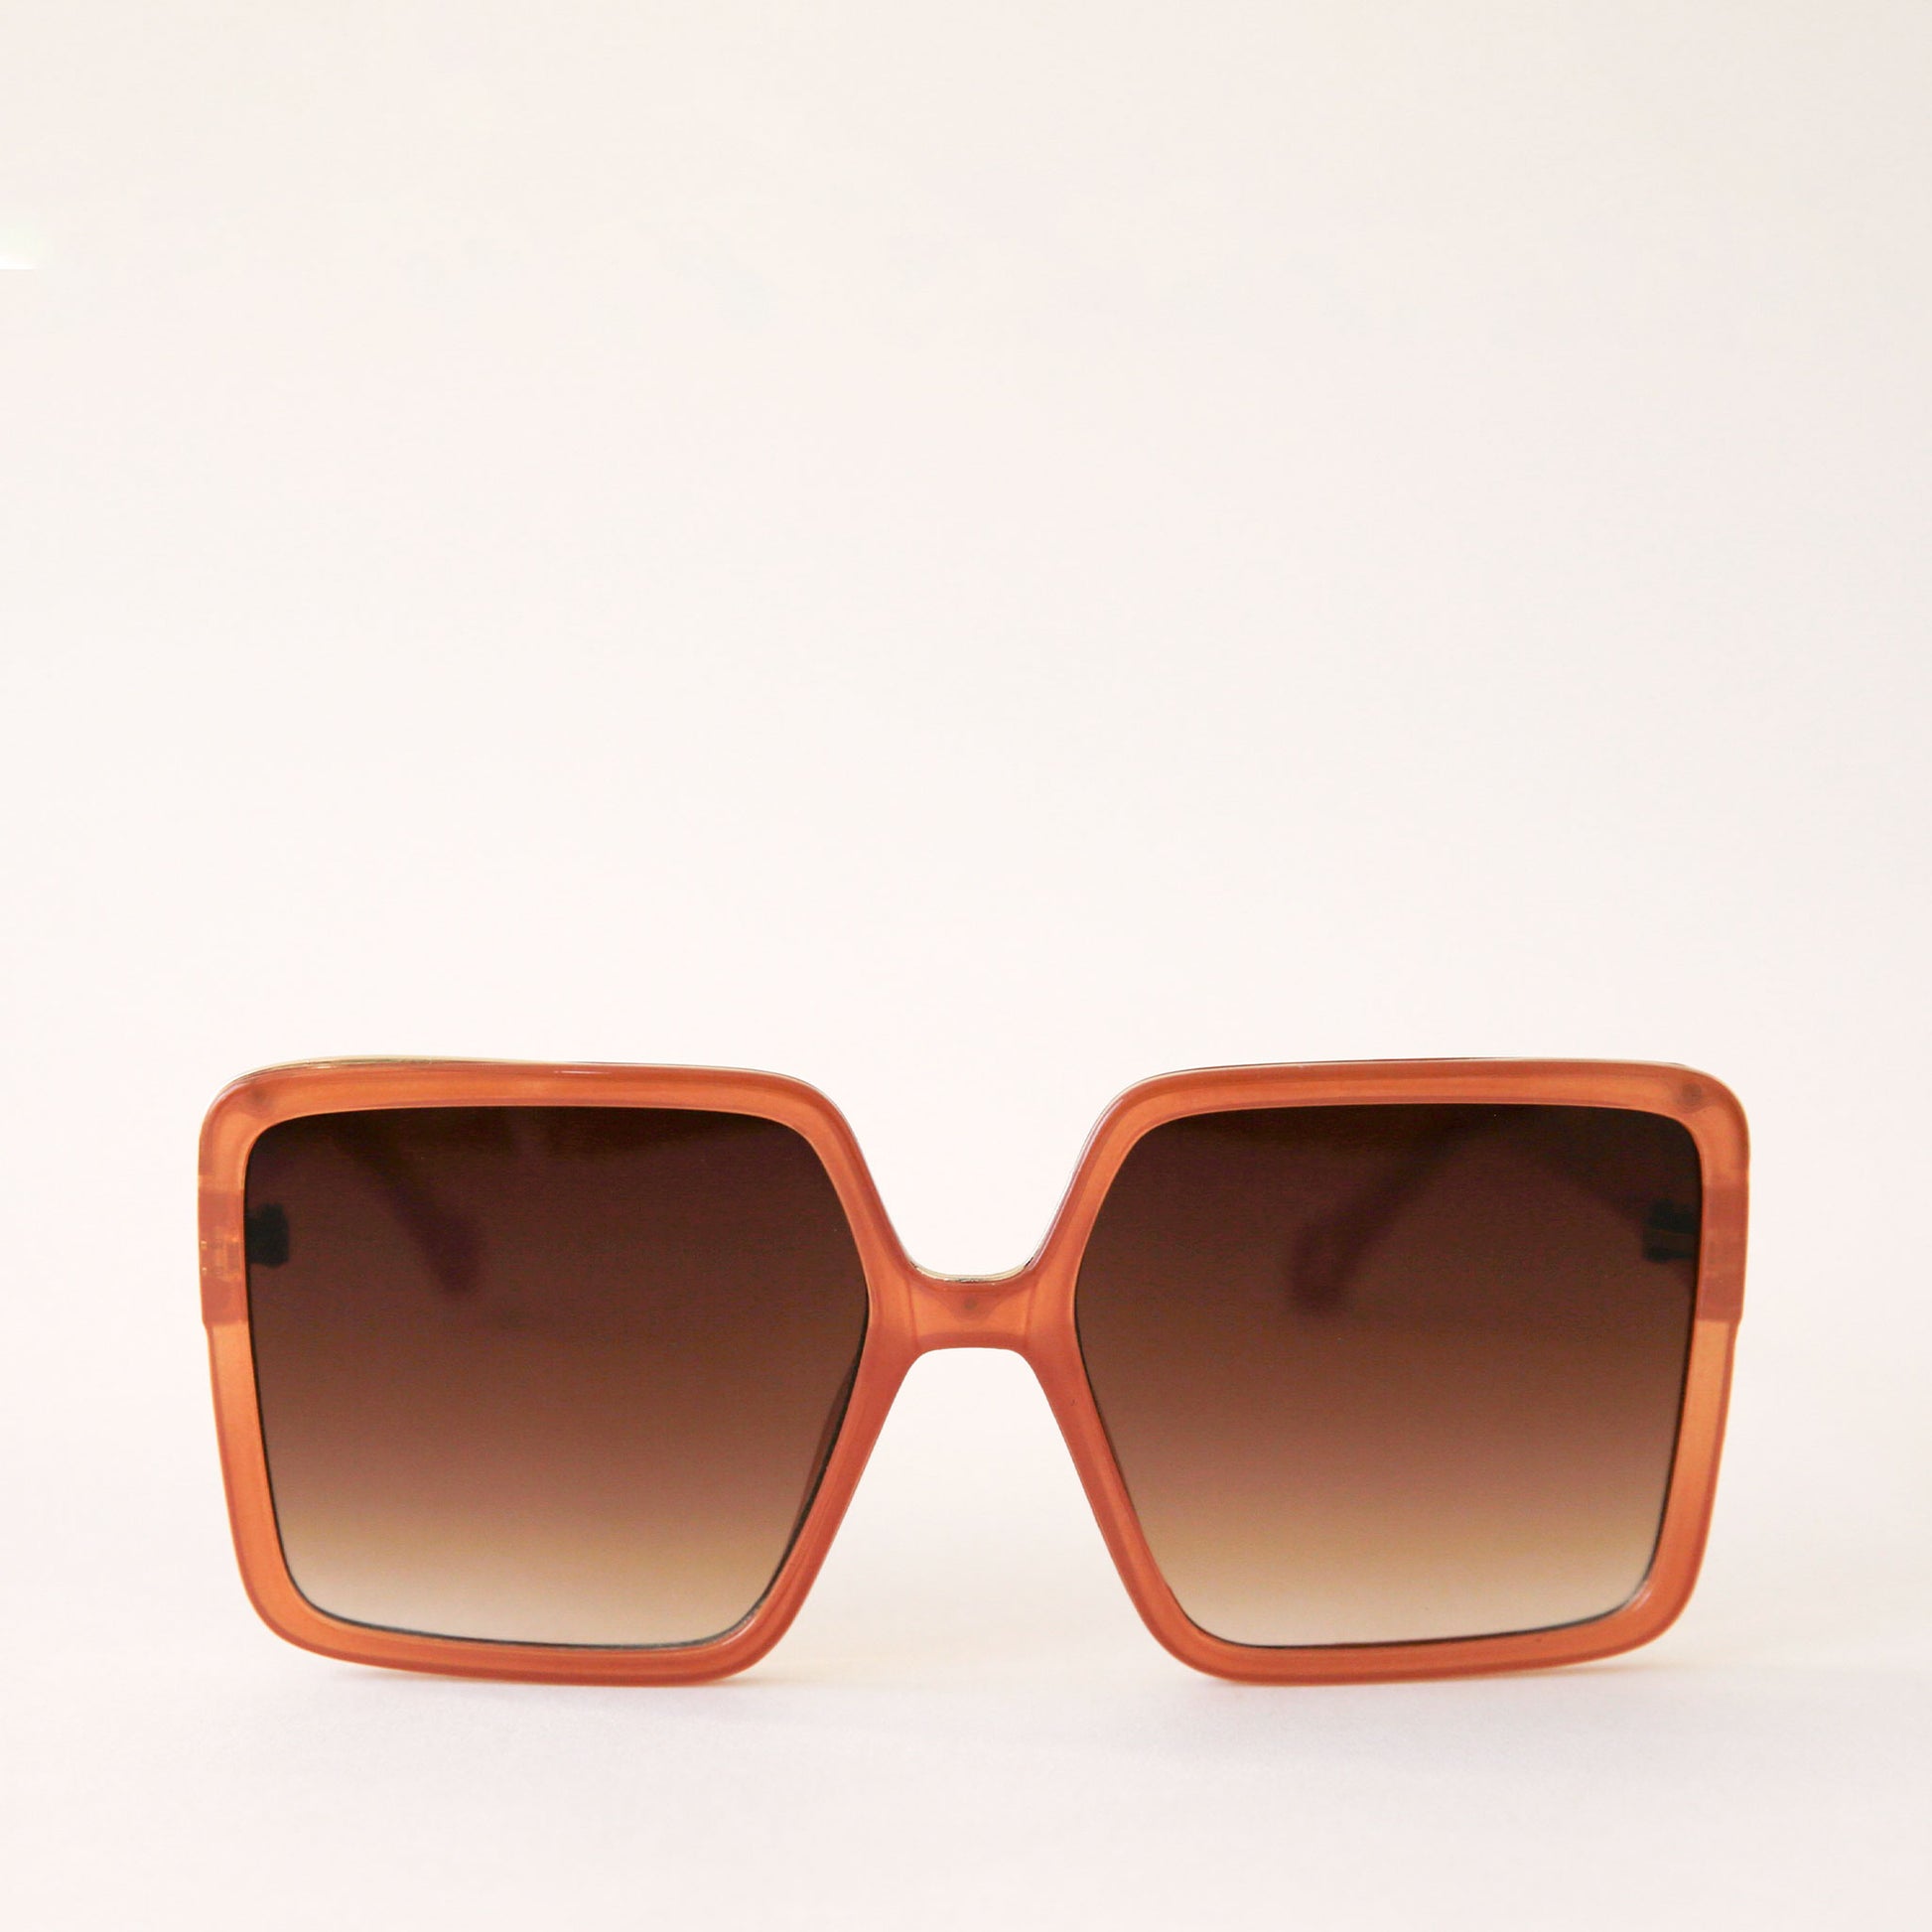 70's inspired square sunglasses with an oversized cognac colored frame and a brown lens.